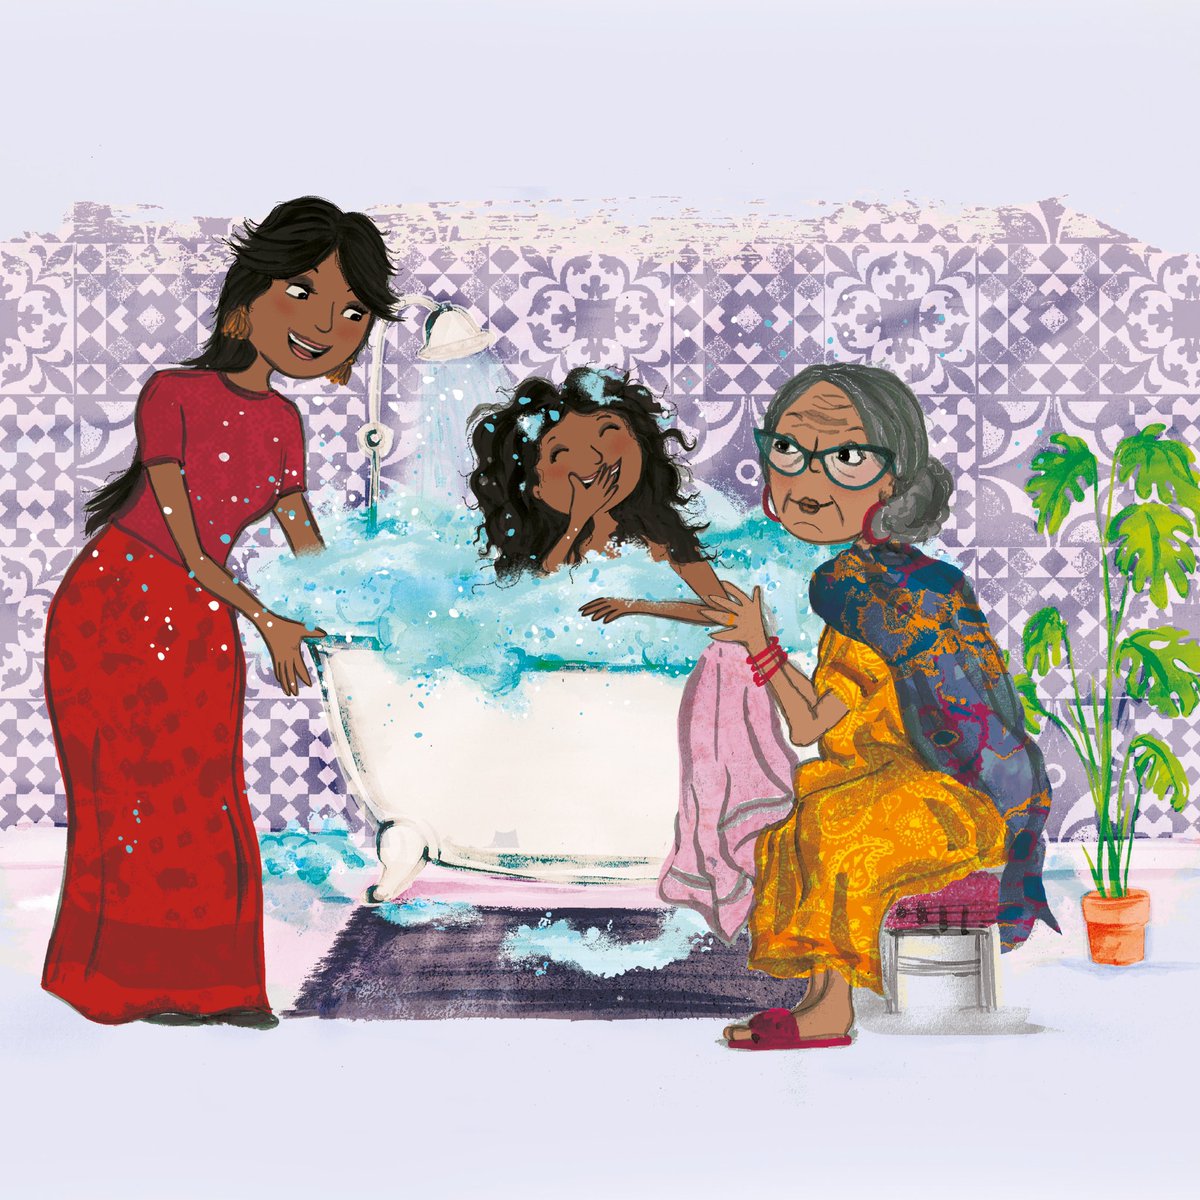 #BookIllustrationOfTheDay is by @michaelahayes22 for “Sunflower Sisters” published by @OwletPress and written by Monika Singh Gangotra, PUBLISHED TODAY! Congrats to all, on a beautiful, warm, tender book, exploring colourism & the bond between women. It’s glowingly illustrated.